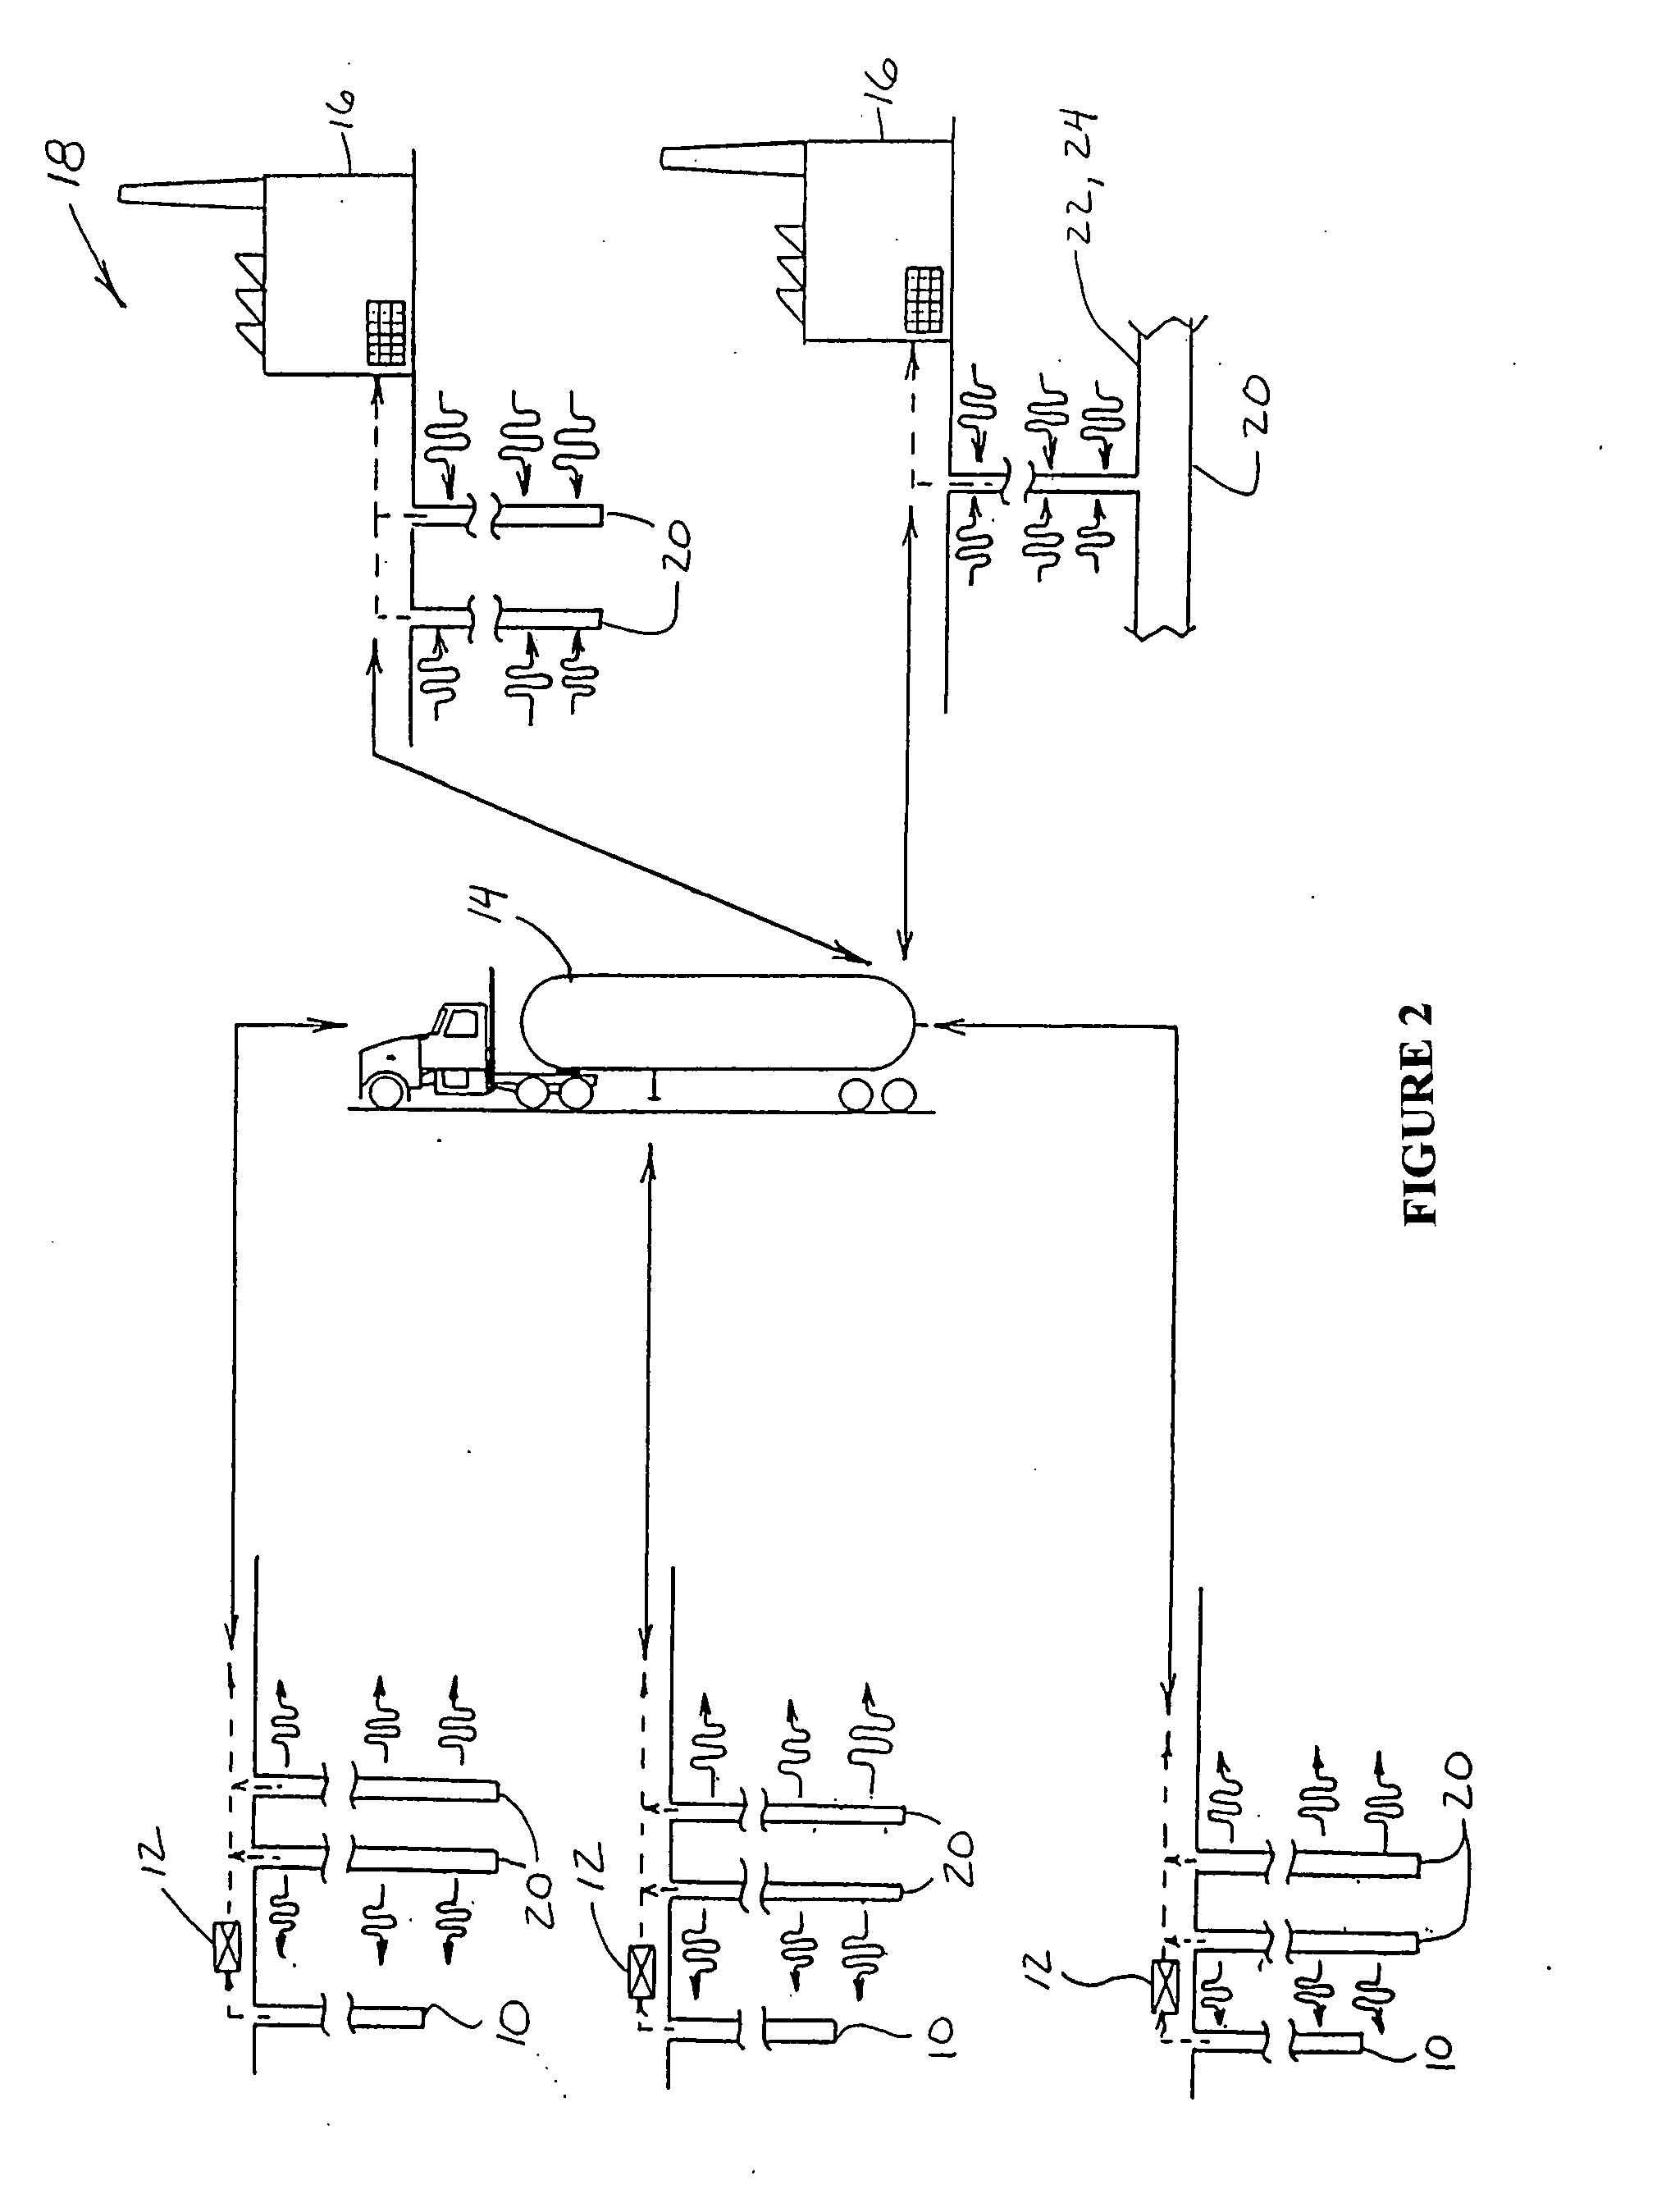 Method and apparatus for recovering and transporting methane gas